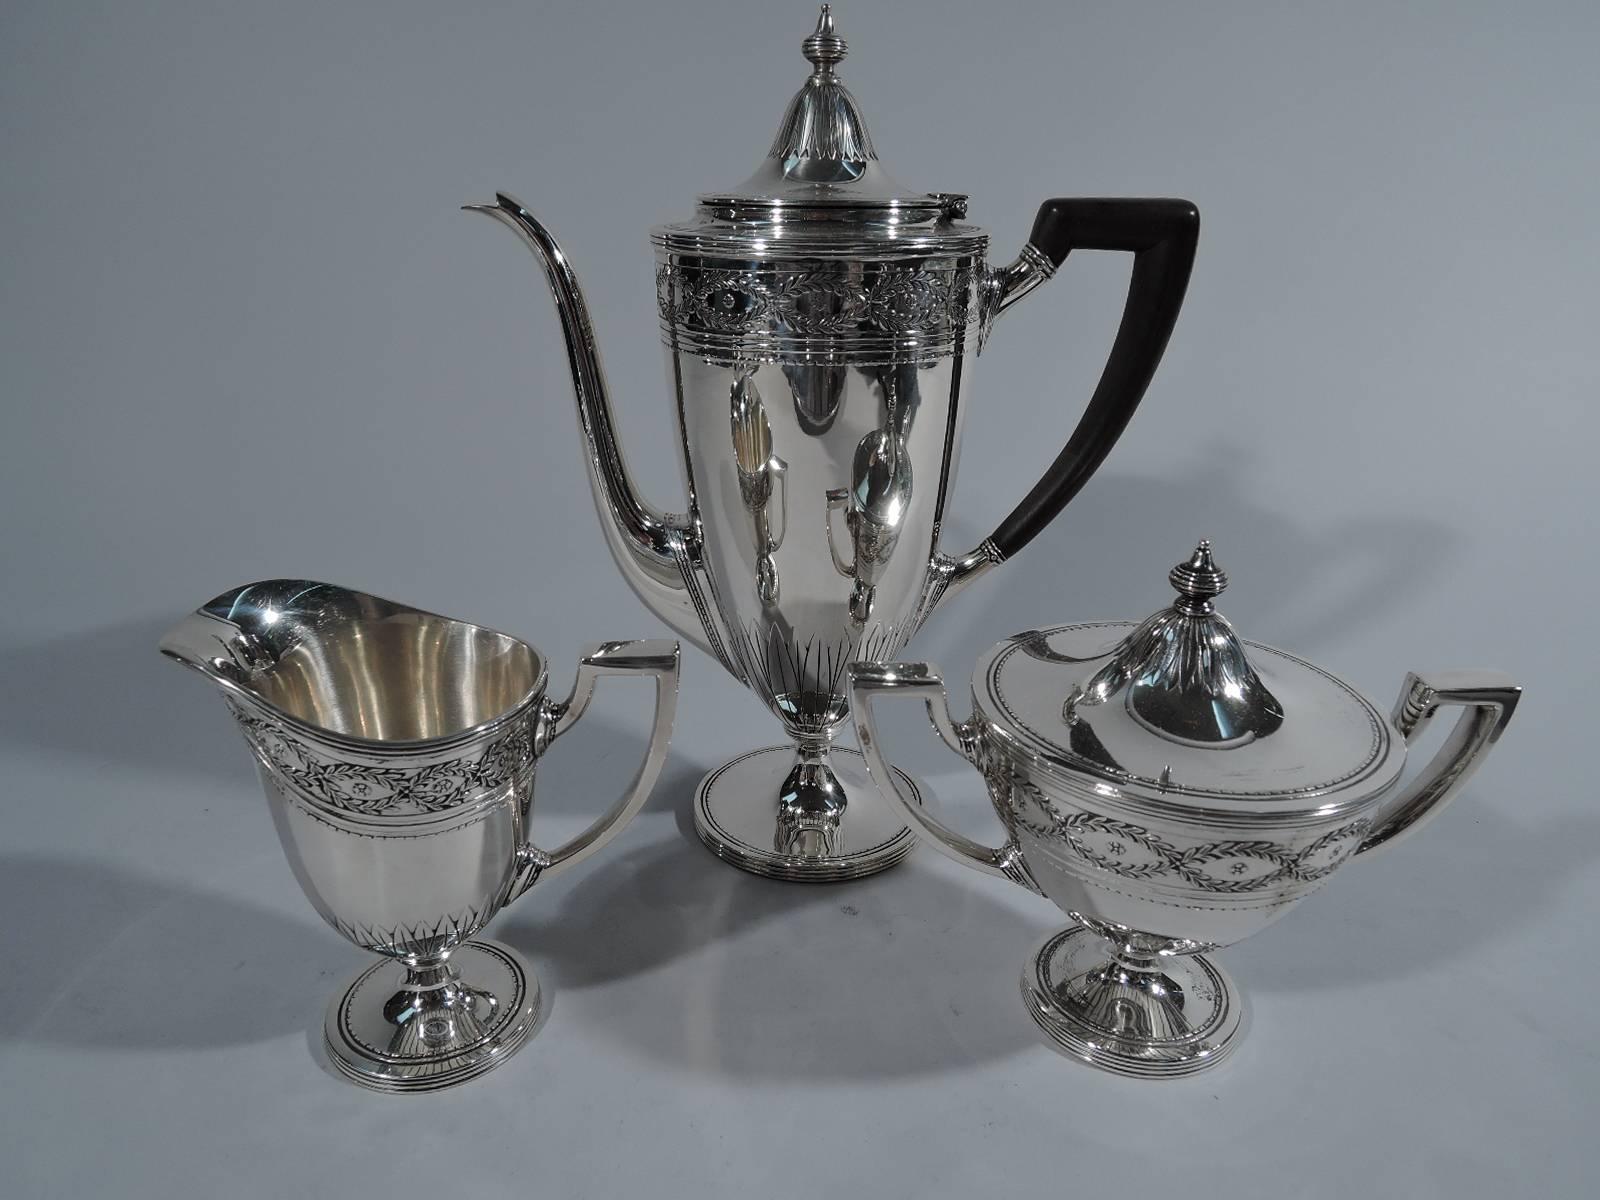 Sterling silver coffee service on tray in Winthrop pattern. Made by Tiffany & Co. in New York. This service comprises coffeepot, creamer, and sugar on tray. 

The Classic Adams-style pattern with laurel wreath borders, dentil, and paterae.